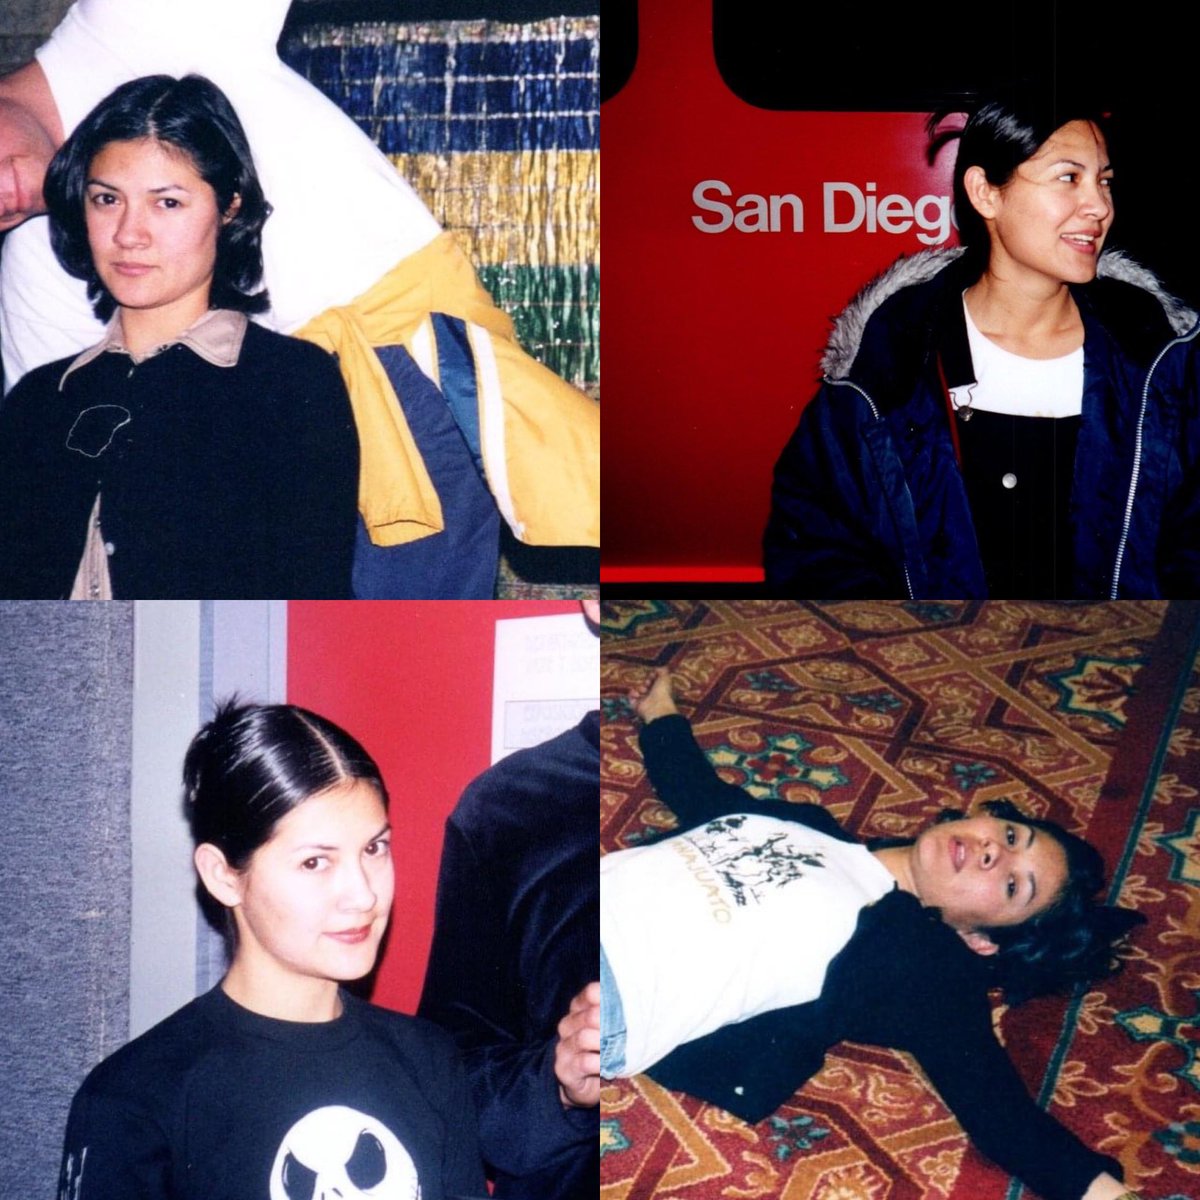 I found a bunch of mid 90s pictures of the muse in college (she got a design degree at Ibero Tijuana). I would drive 3 hours from CalArts every weekend to visit her always worried she had left me for a bad hombre. She admitted she keep waiting for me to stop visiting. Young love! 